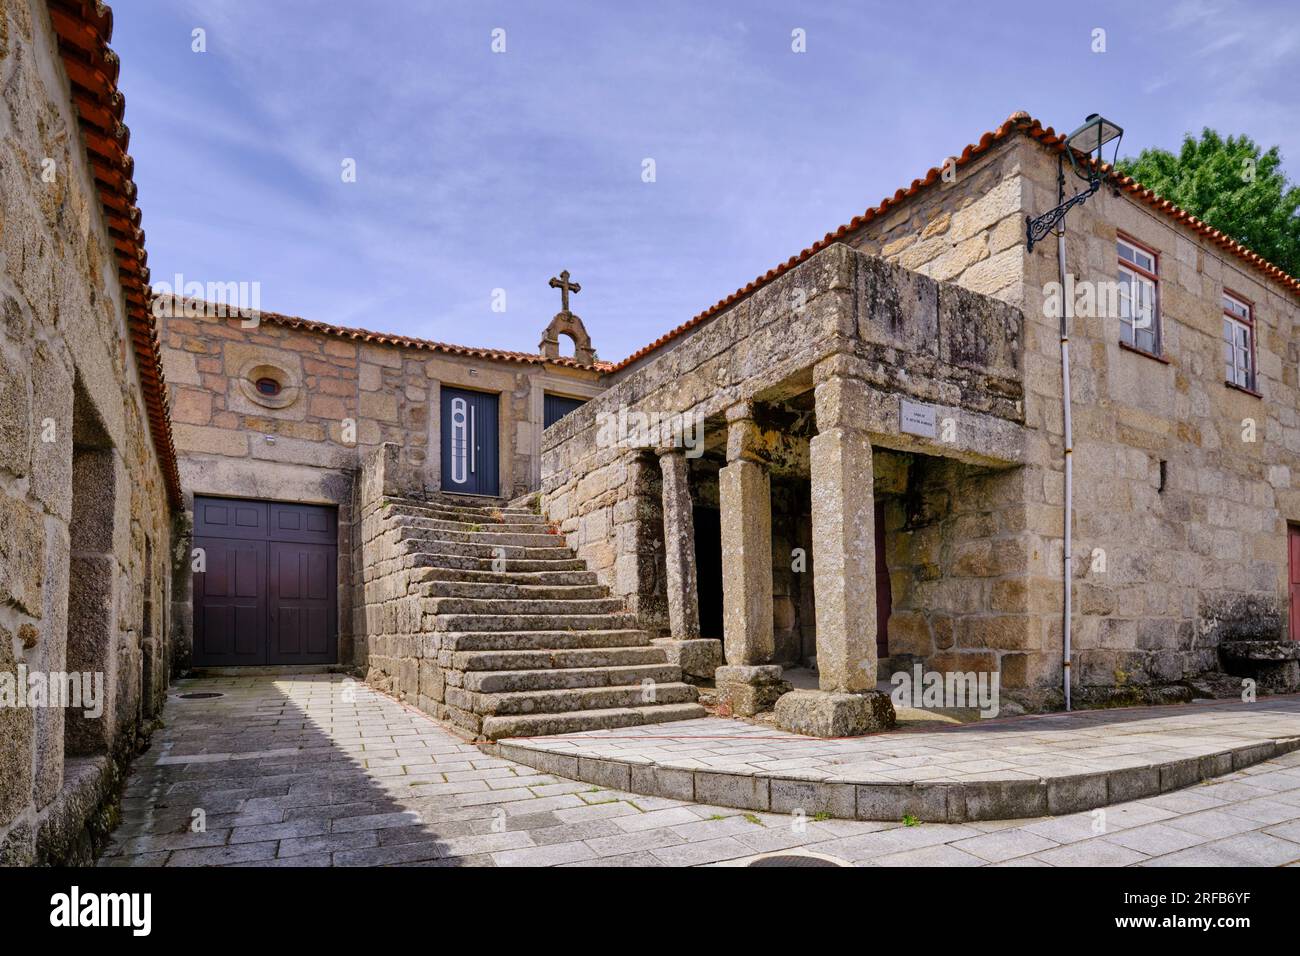 The patio of the house where was born Aquilino Ribeiro, in 1885, one of the greatest portuguese writers, at the village of Carregal de Tabosa, Sernanc Stock Photo